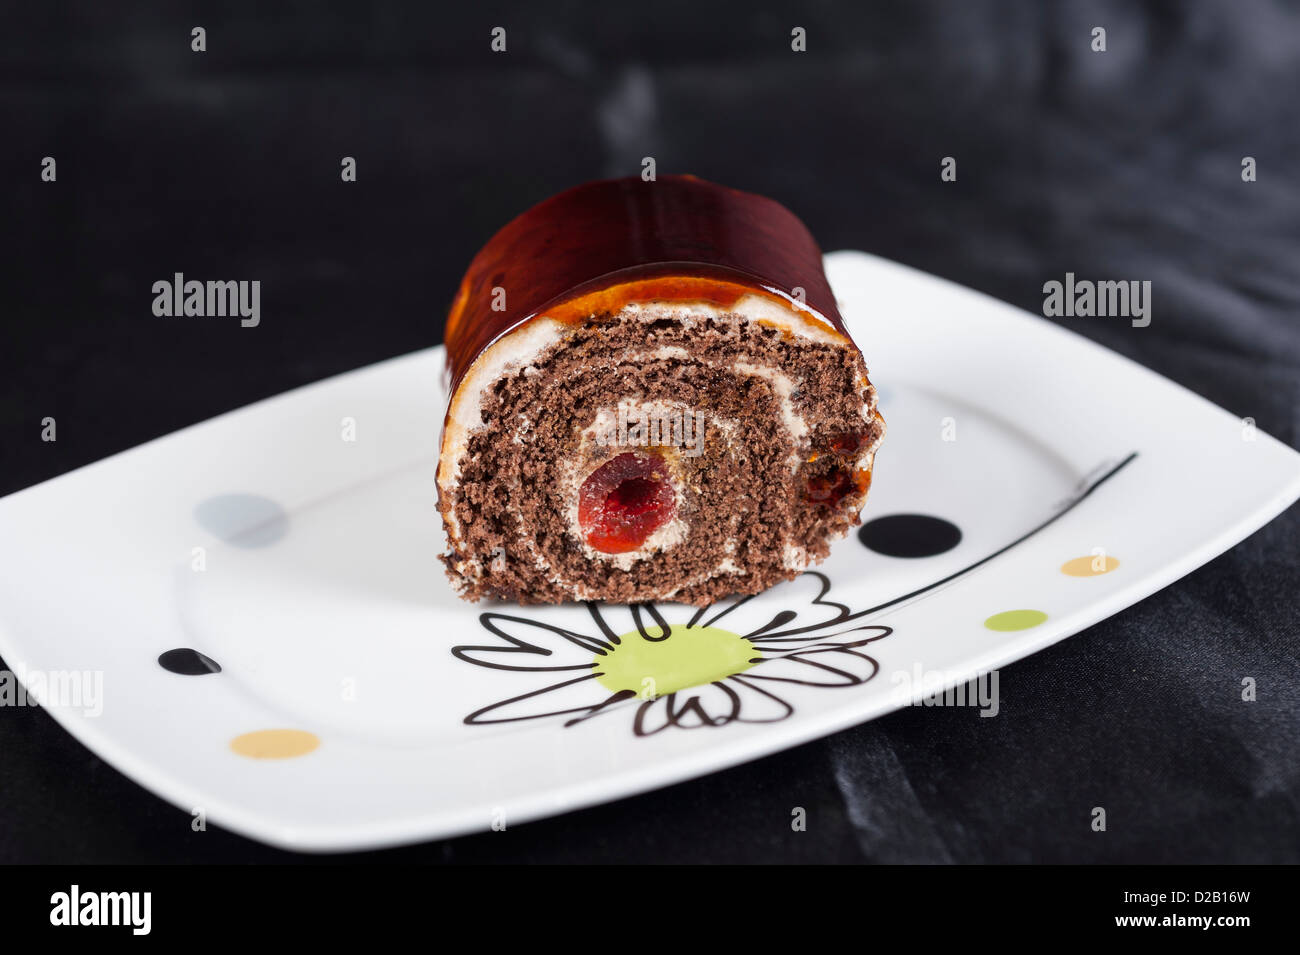 Chocolate sponge roll dessert with cherry on a white plate Stock Photo